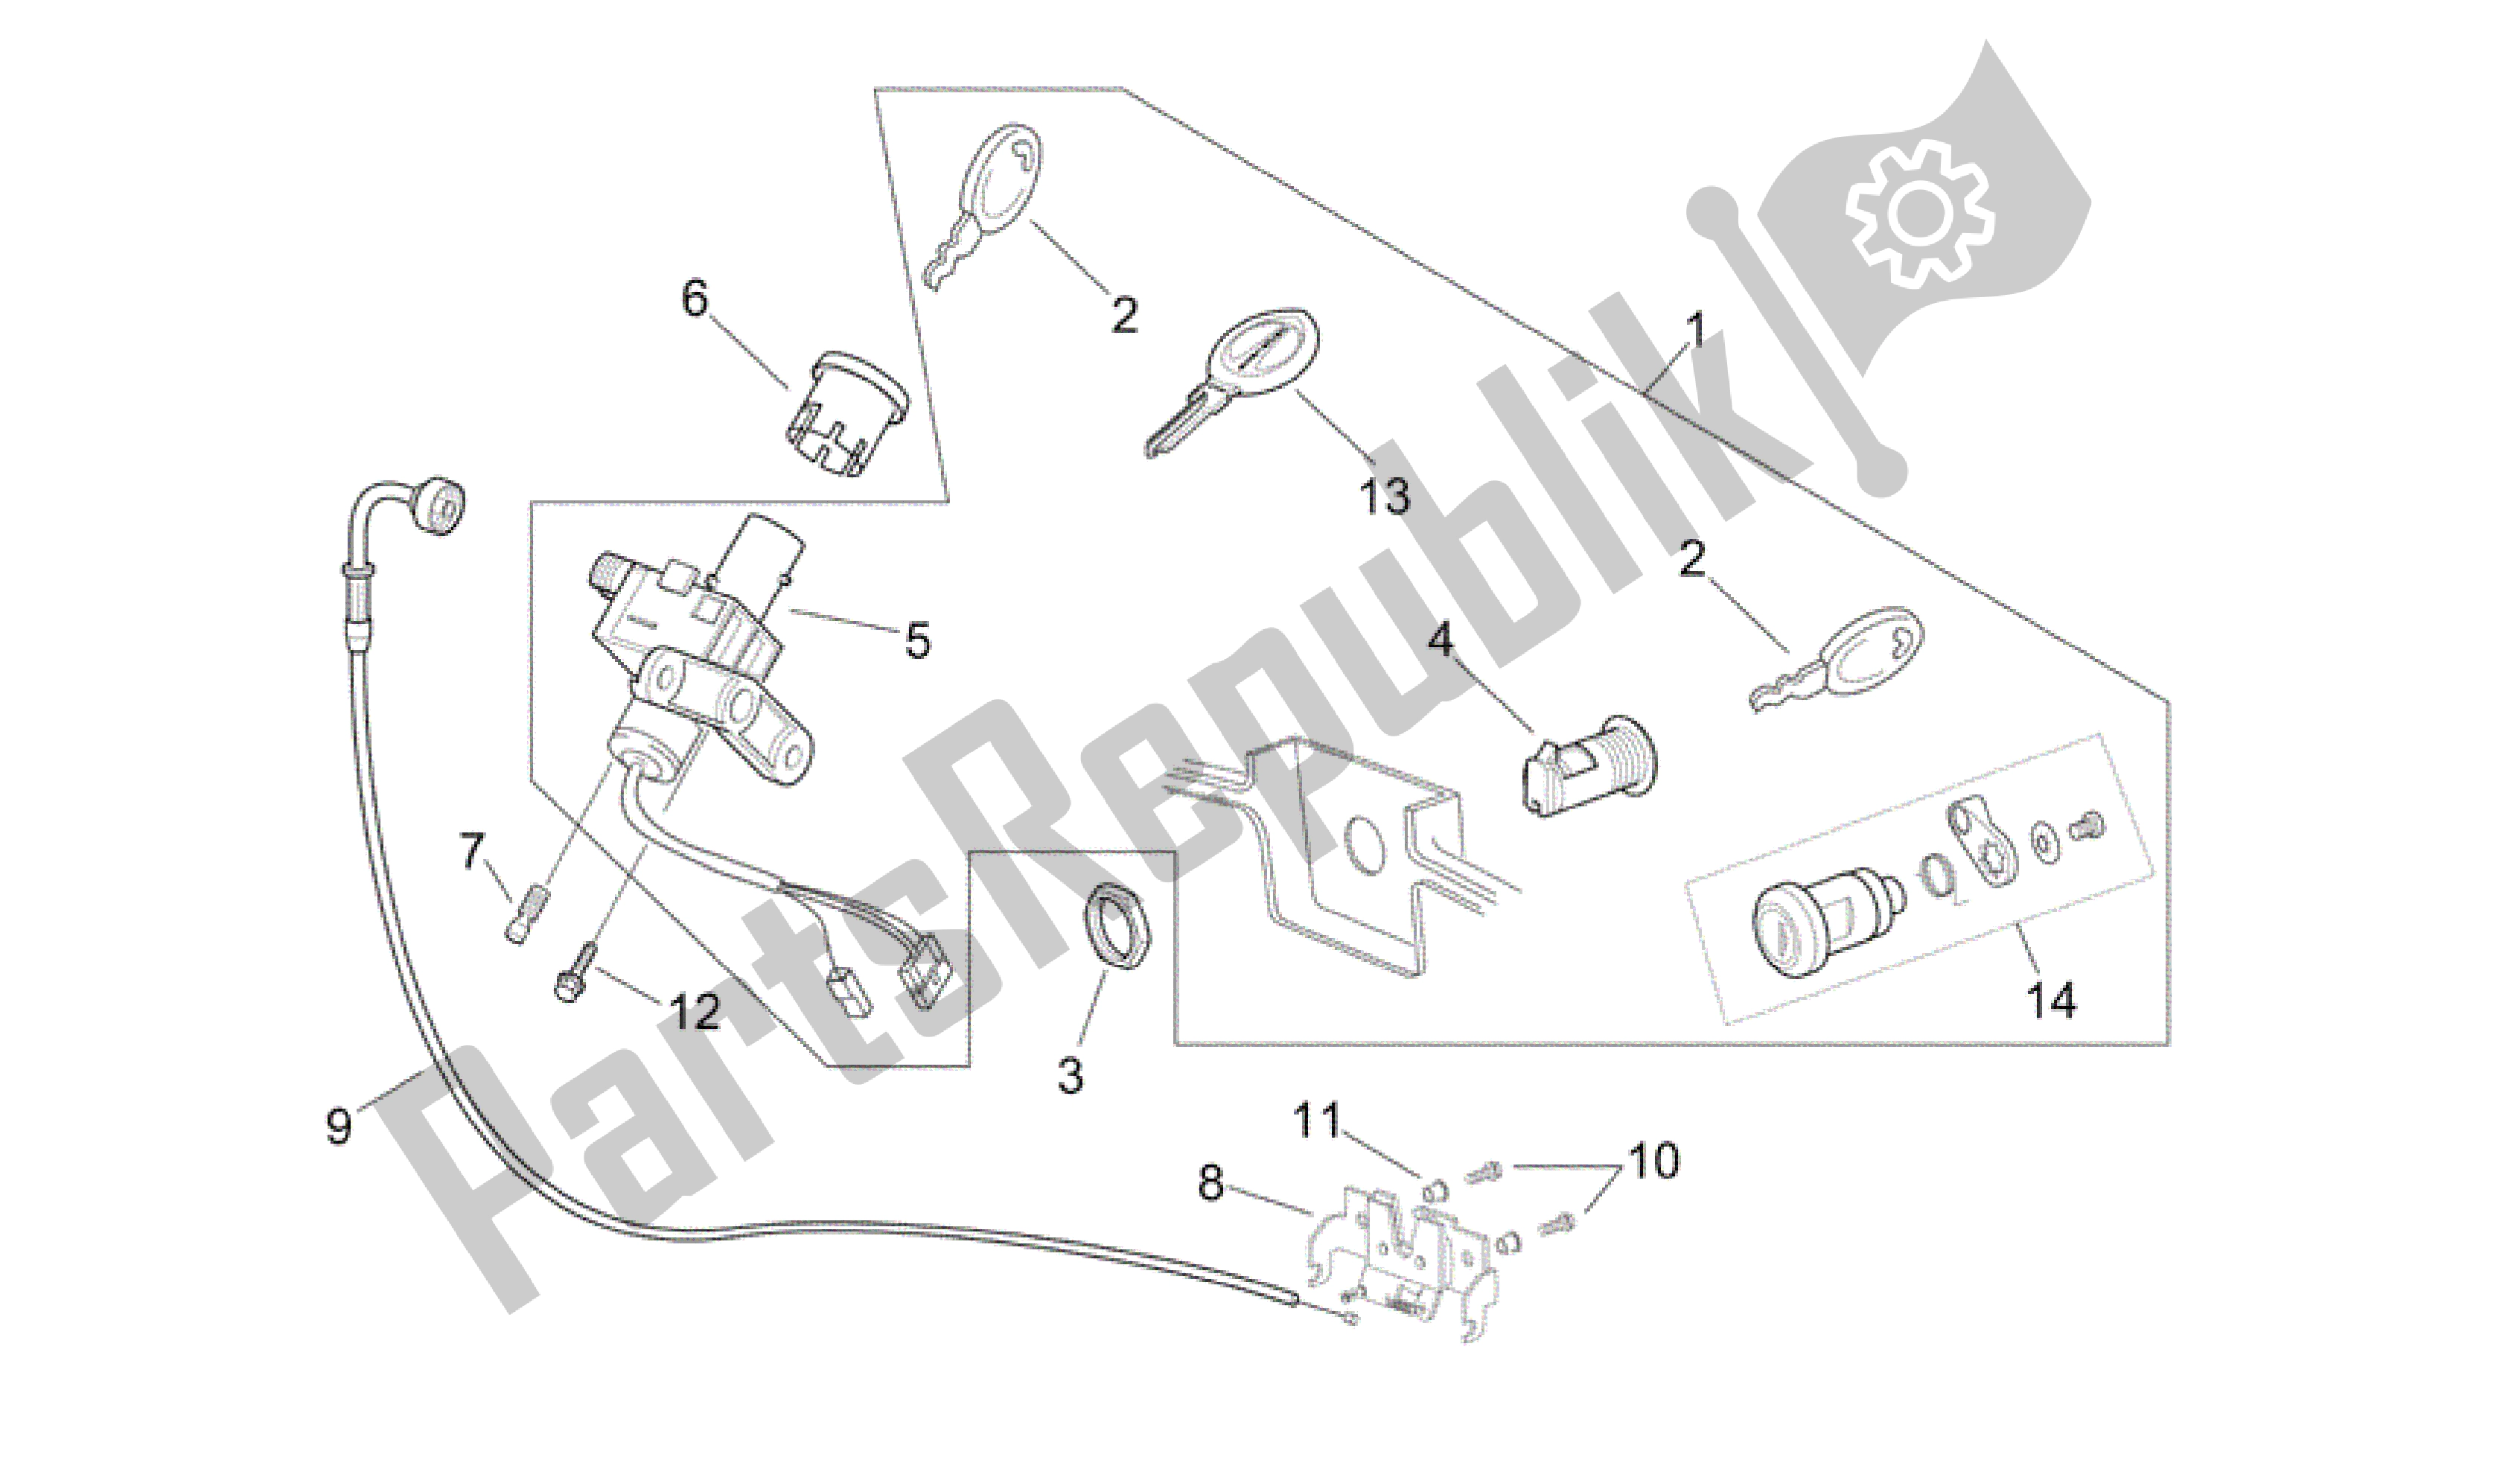 All parts for the Lock Hardware Kit of the Aprilia Scarabeo 250 2004 - 2006